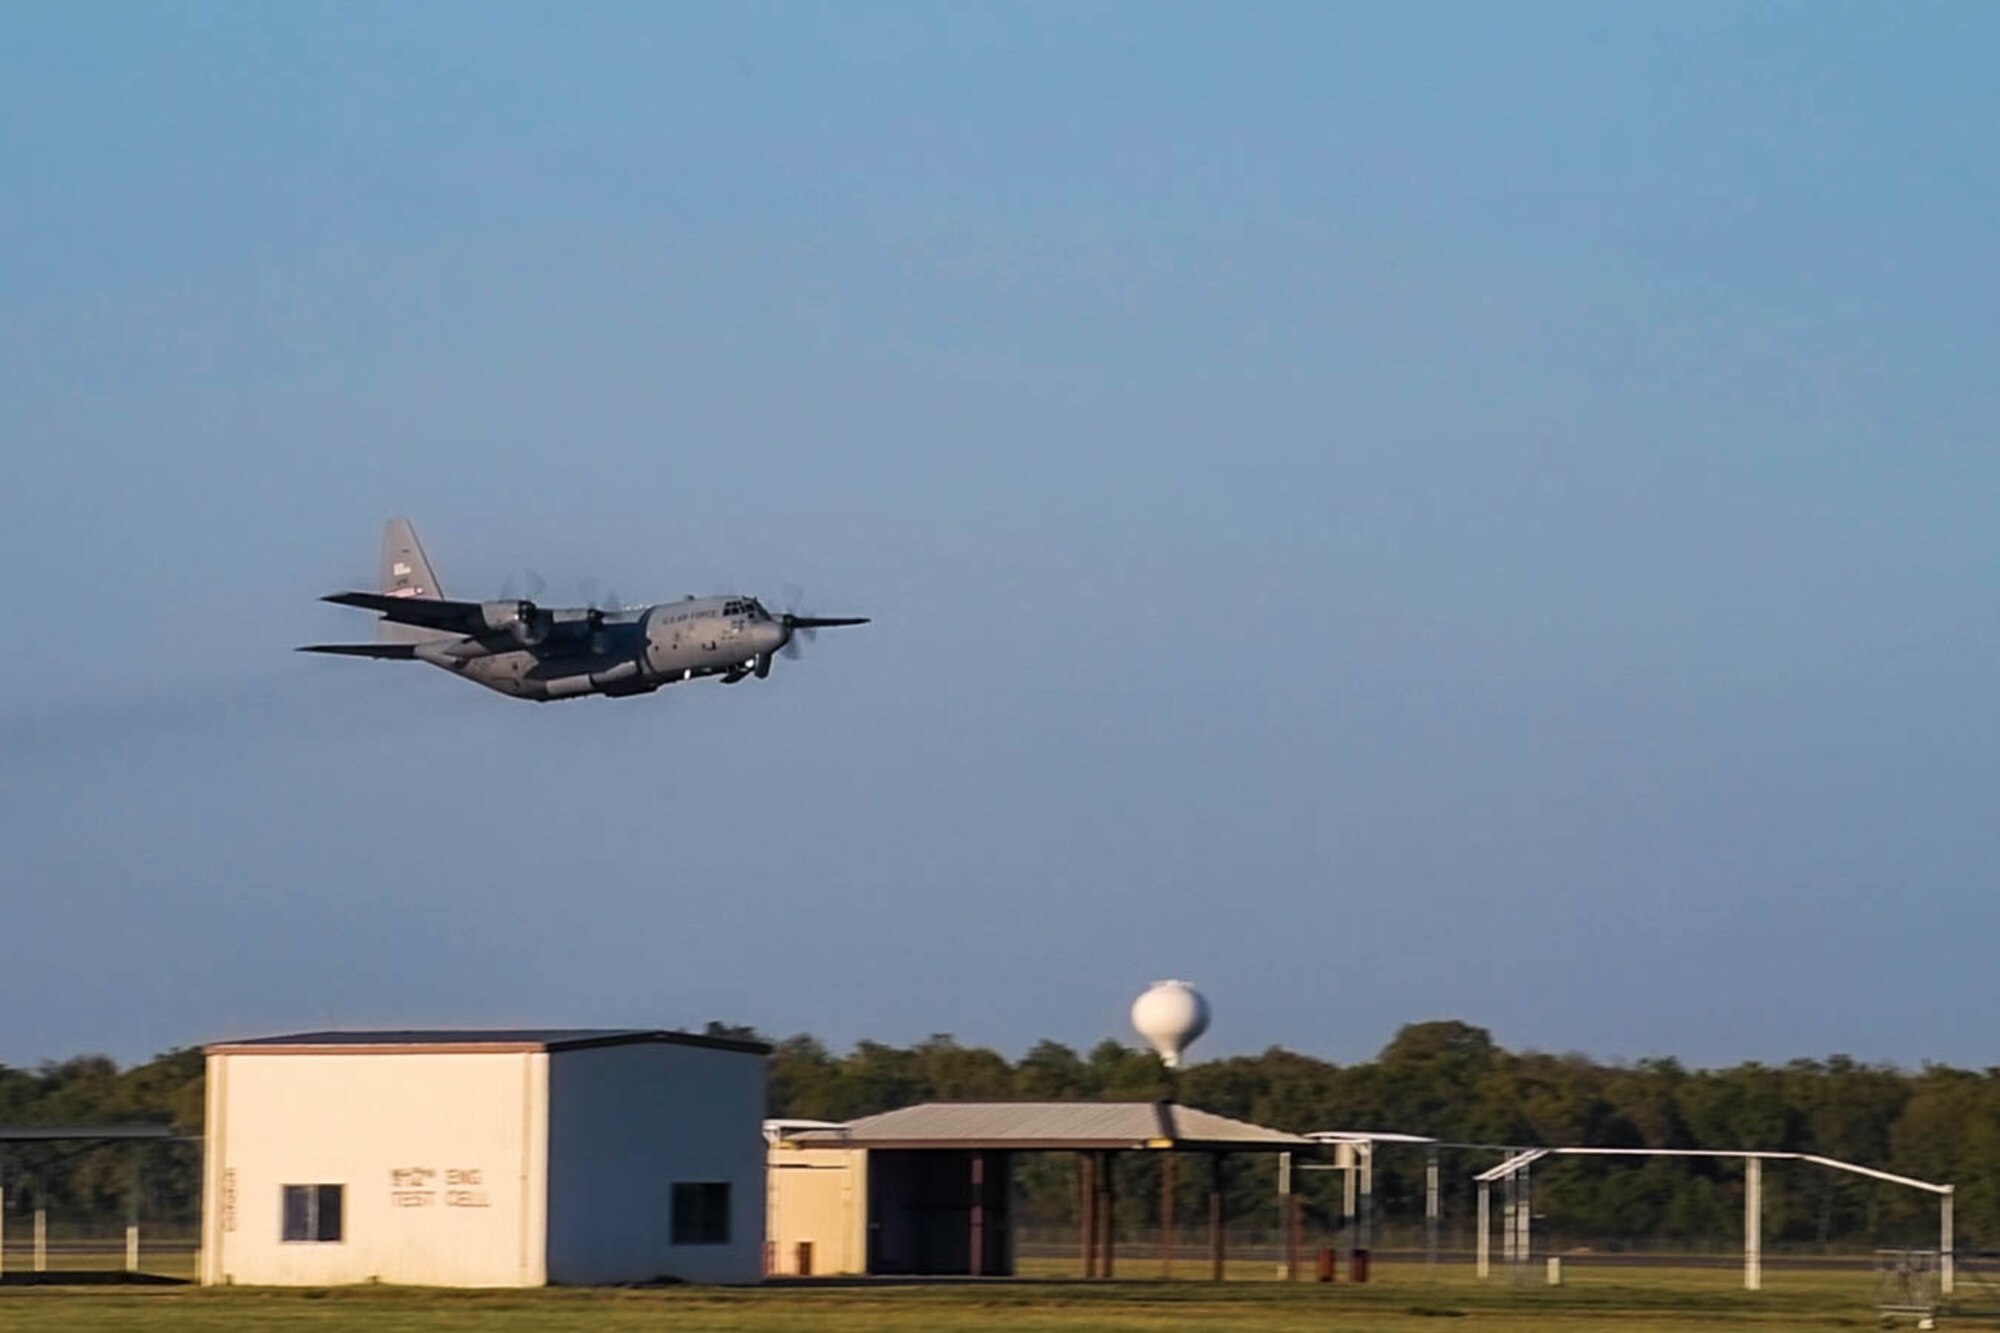 A U.S. Air Force Reserve C-130H Hercules aircraft assigned to the 910th Airlift Wing, based at Youngstown Air Reserve Station, Ohio and equipped with a Modular Aerial Spray System, takes off from Barksdale Air Force Base, Louisiana, Oct. 22, 2020.